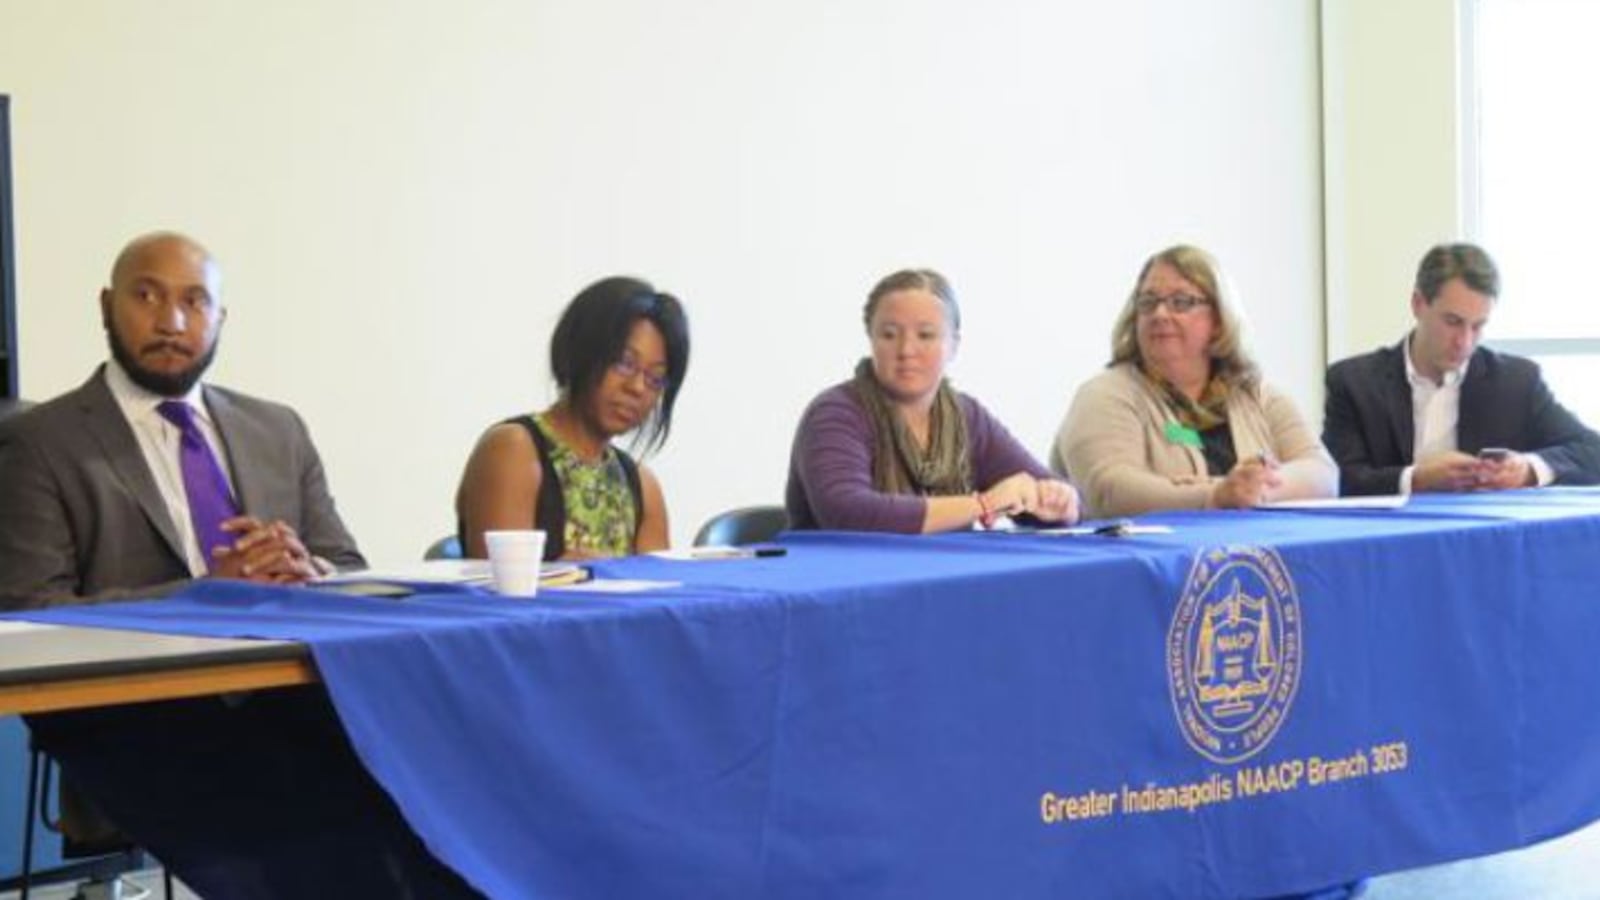 Indianapolis Public School Board candidates David Hampton, Samantha Adair-White, Annie Roof, Kelly Bentley and Josh Owens sit at a candidate forum hosted by the Greater Indianapolis NAACP chapter last month.